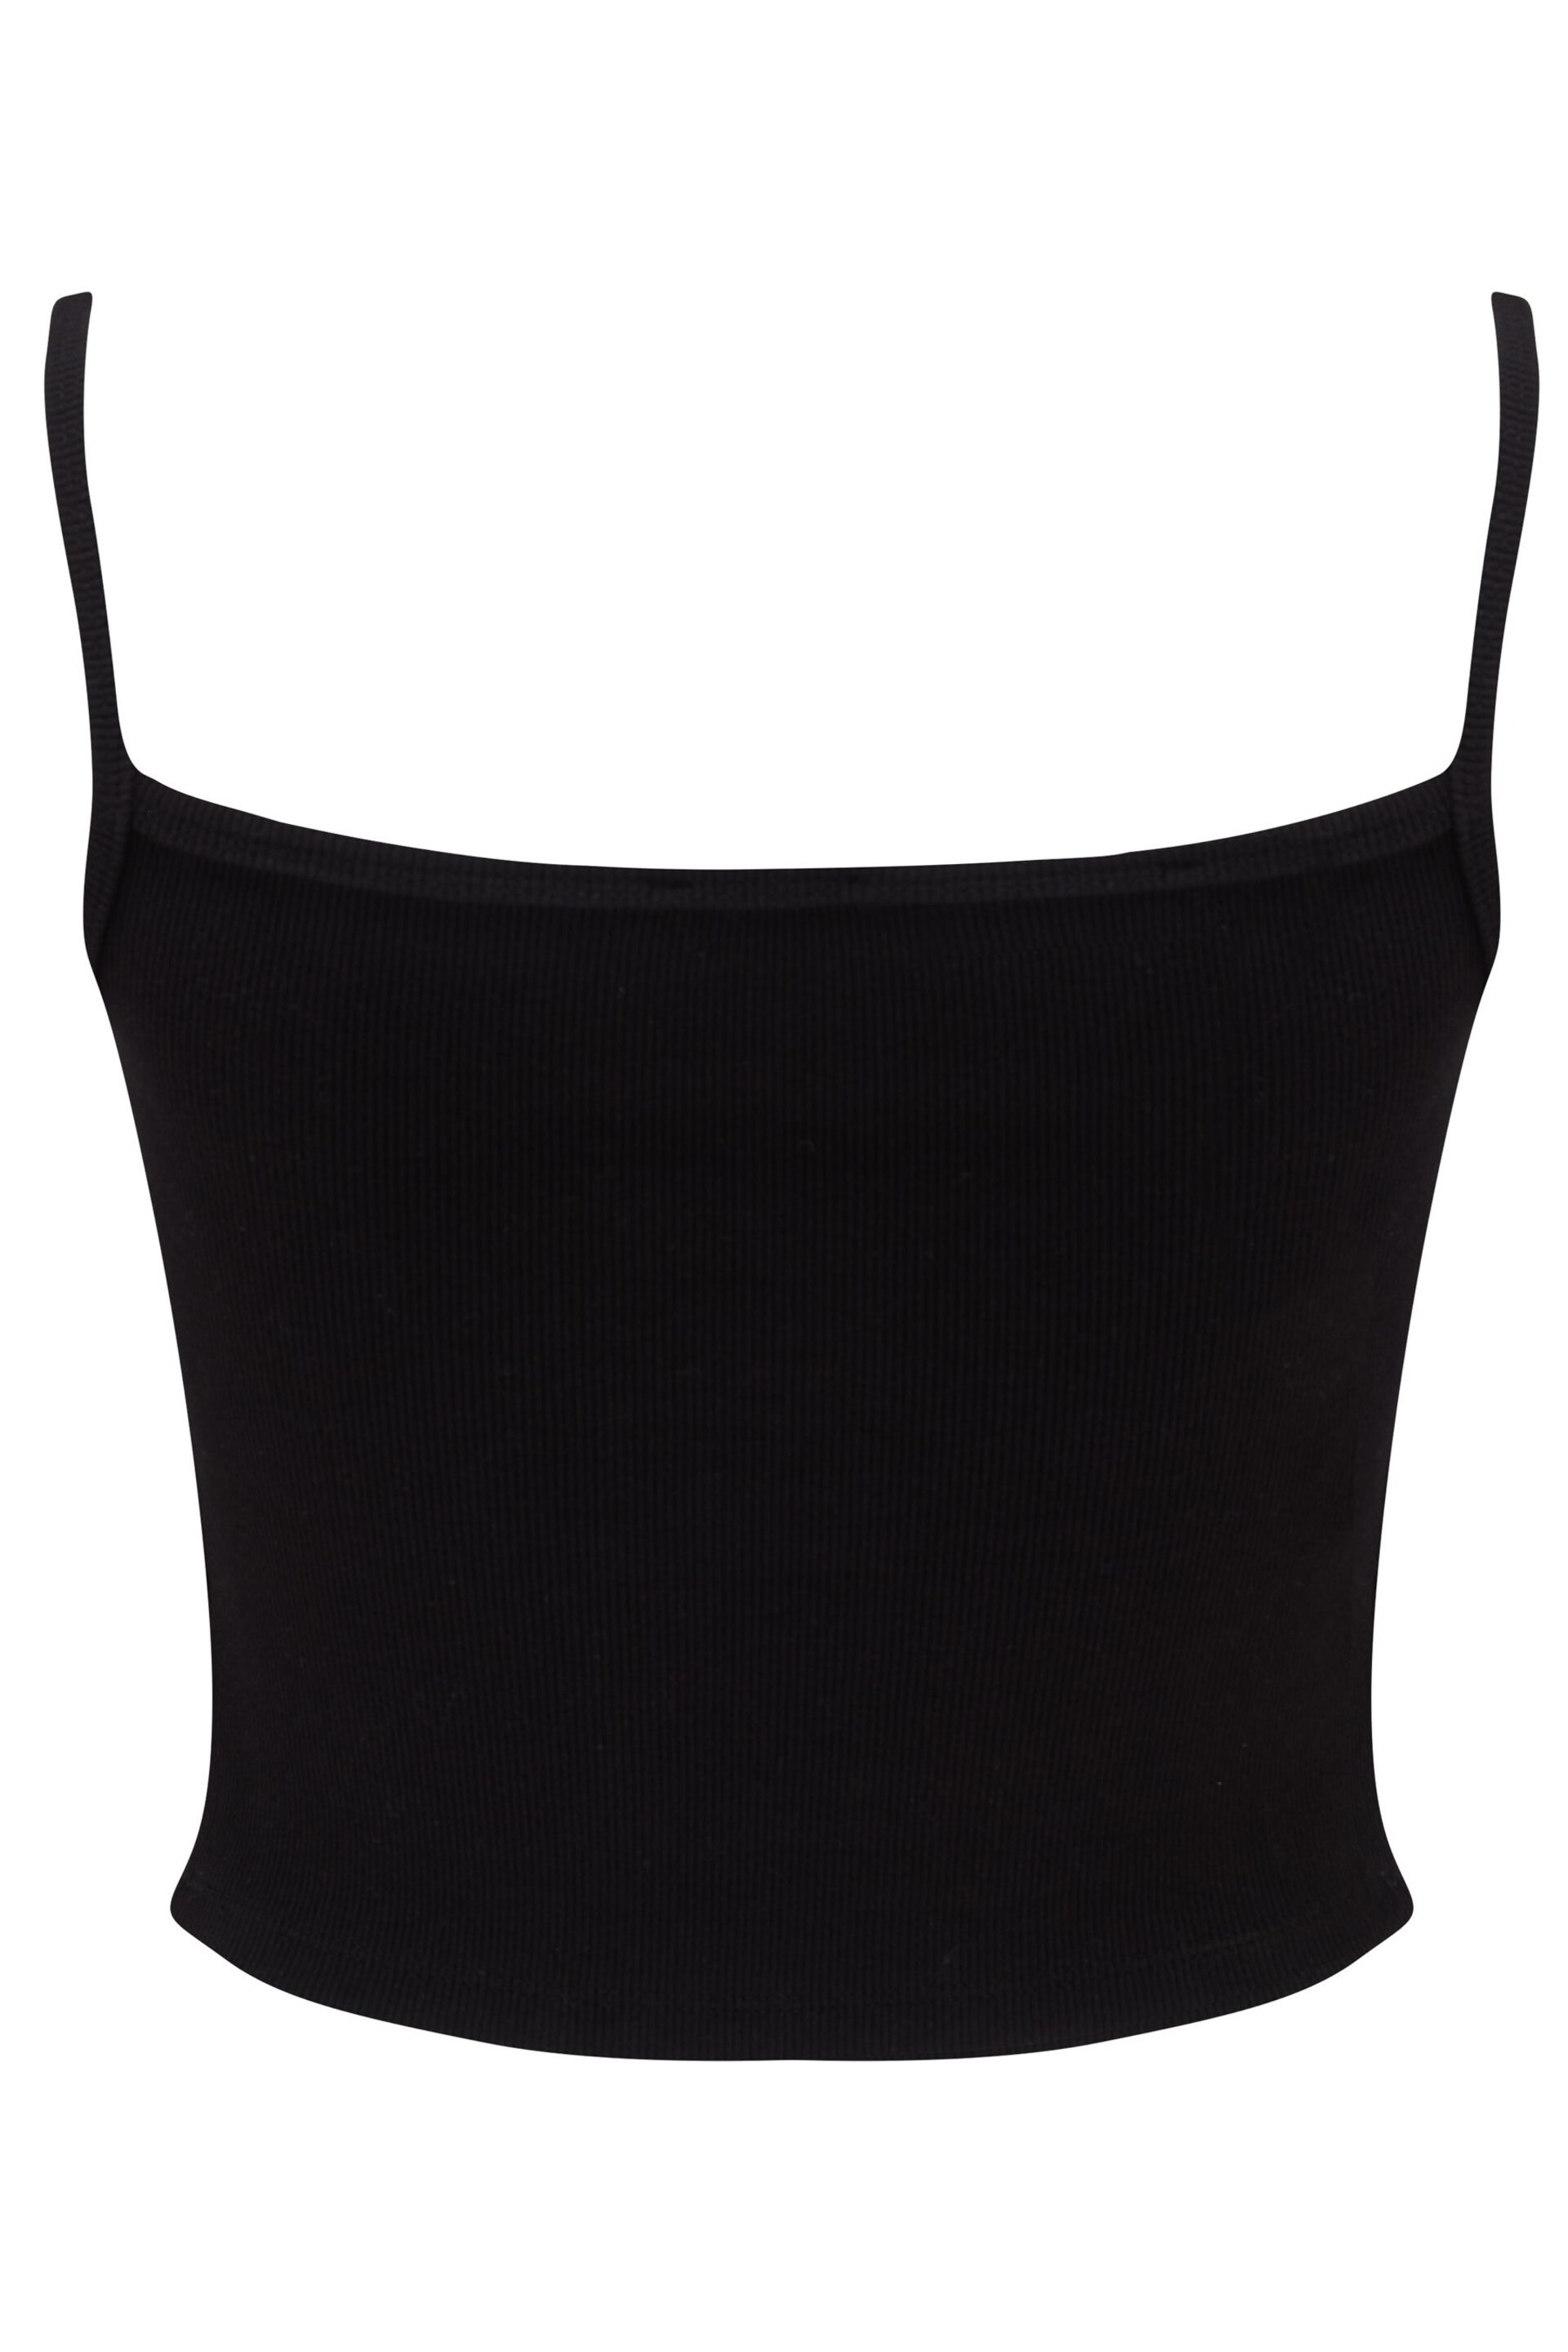 Pour Moi Black Off Duty Rib Jersey Support Cami - Image 5 of 5